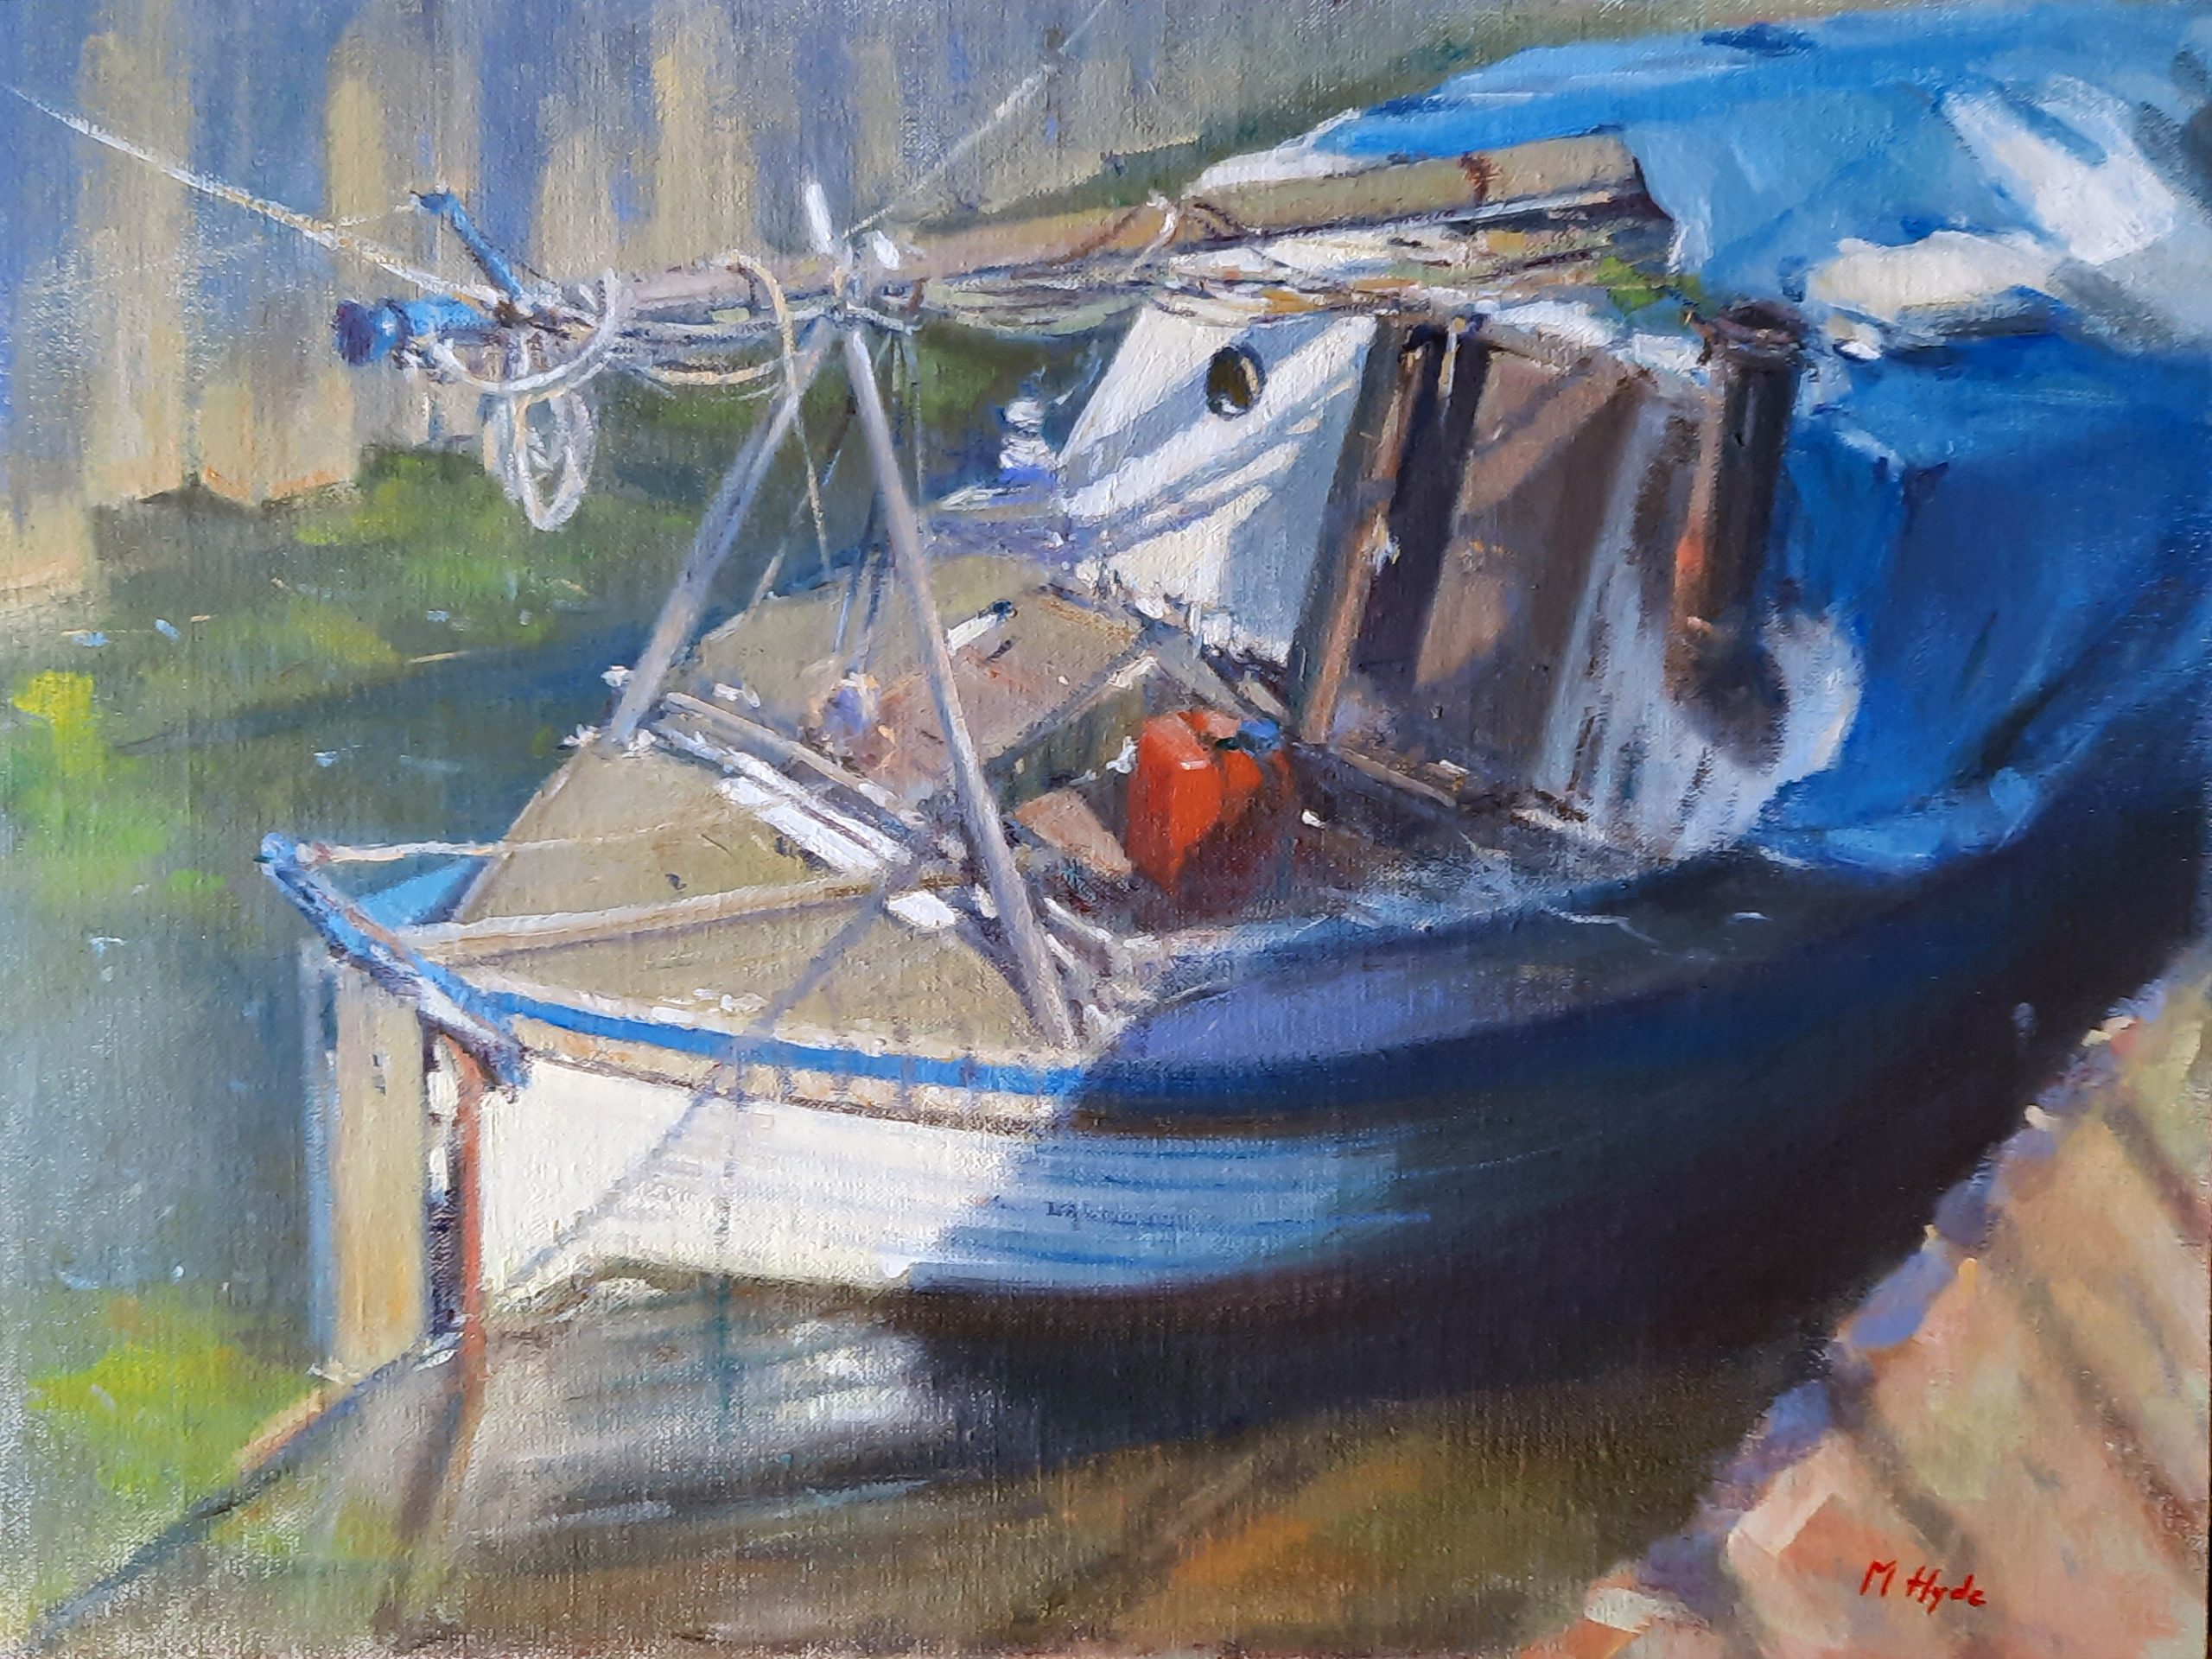 Small Boats Online exhibition